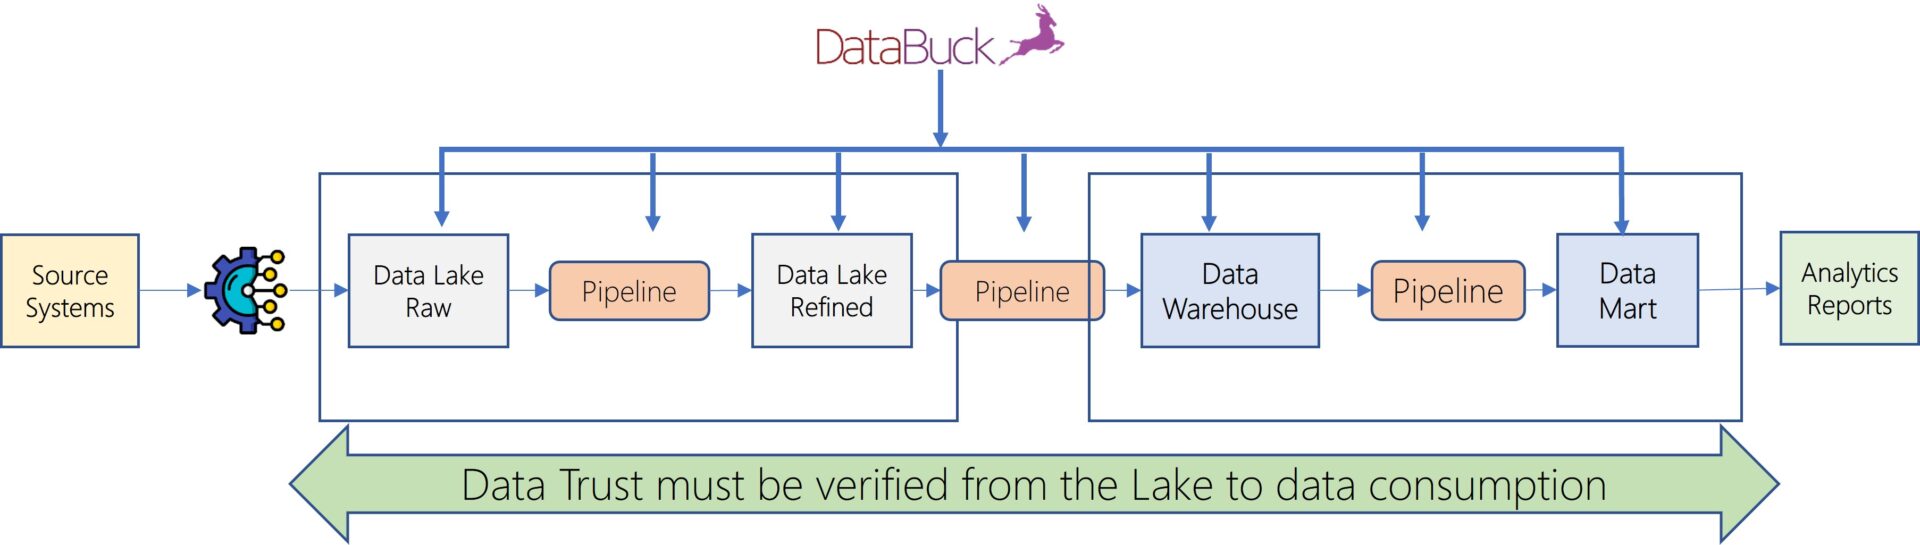 Data Trust must be verified from the Lake to data consumption